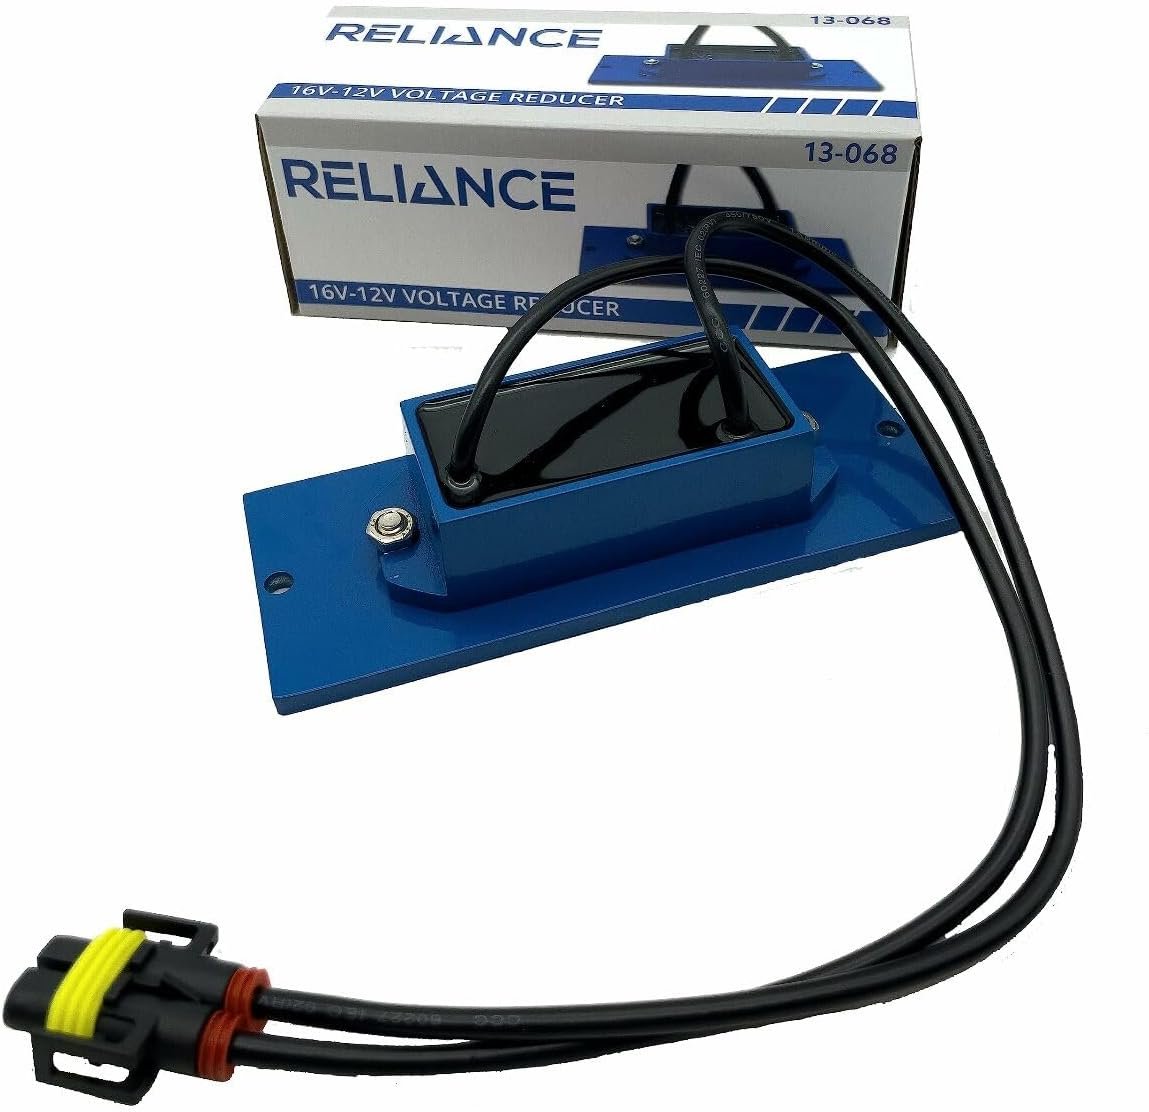 RELIANCE 16 V to 12 V Voltage Reducer | for Use on Golf Carts and Other Applications Utilizing 8 Volt Batteries